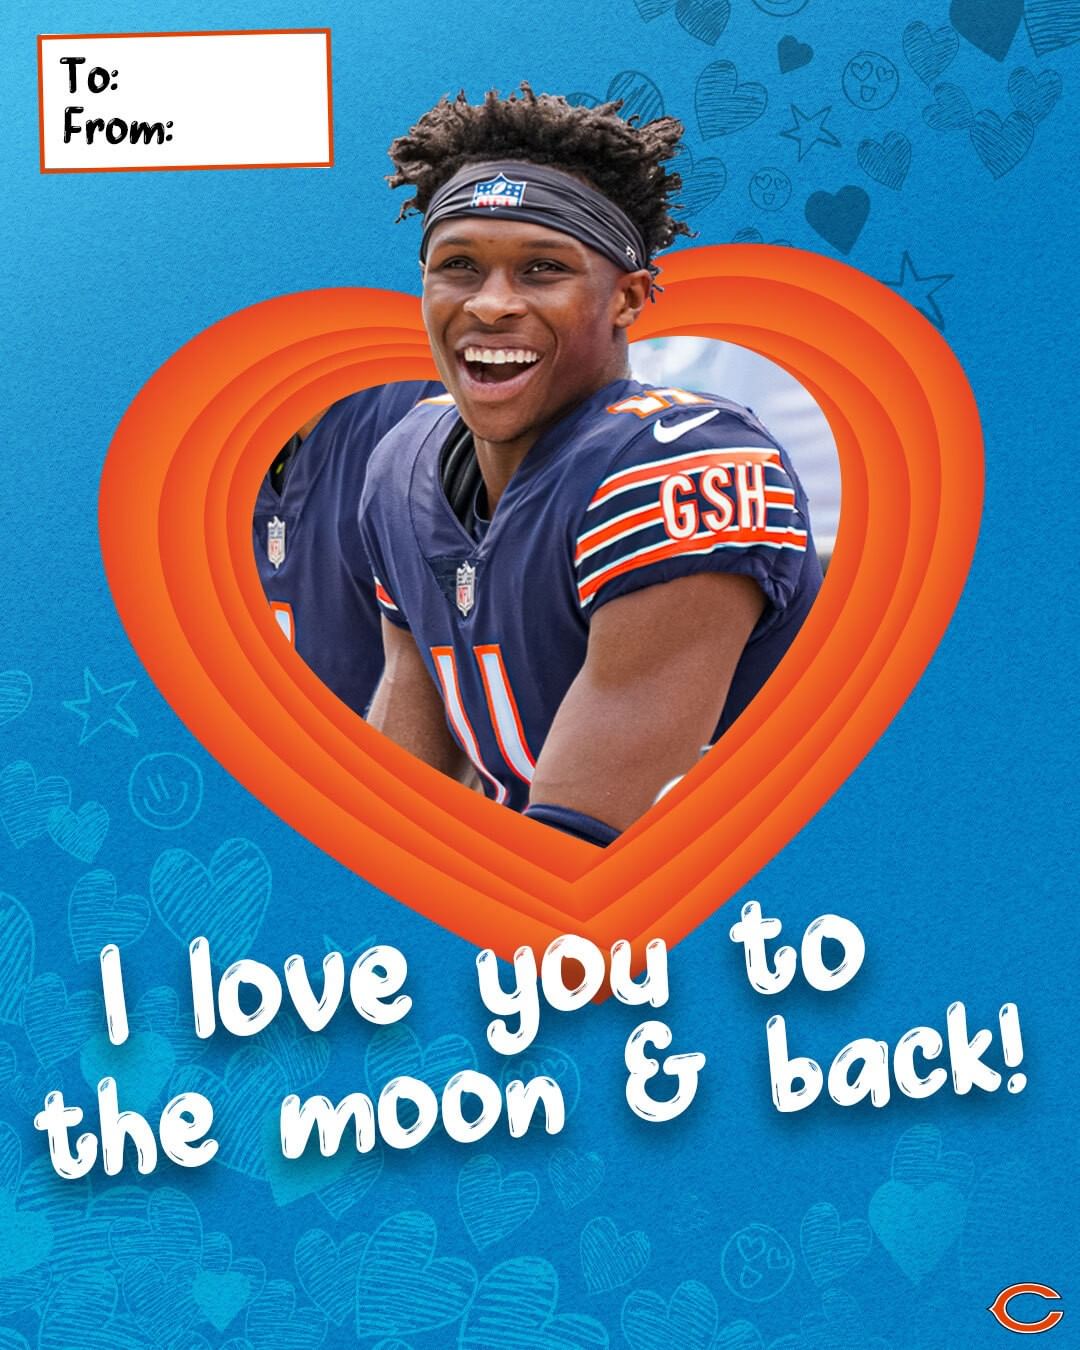 Anyone need some last minute #ValentinesDay cards?...